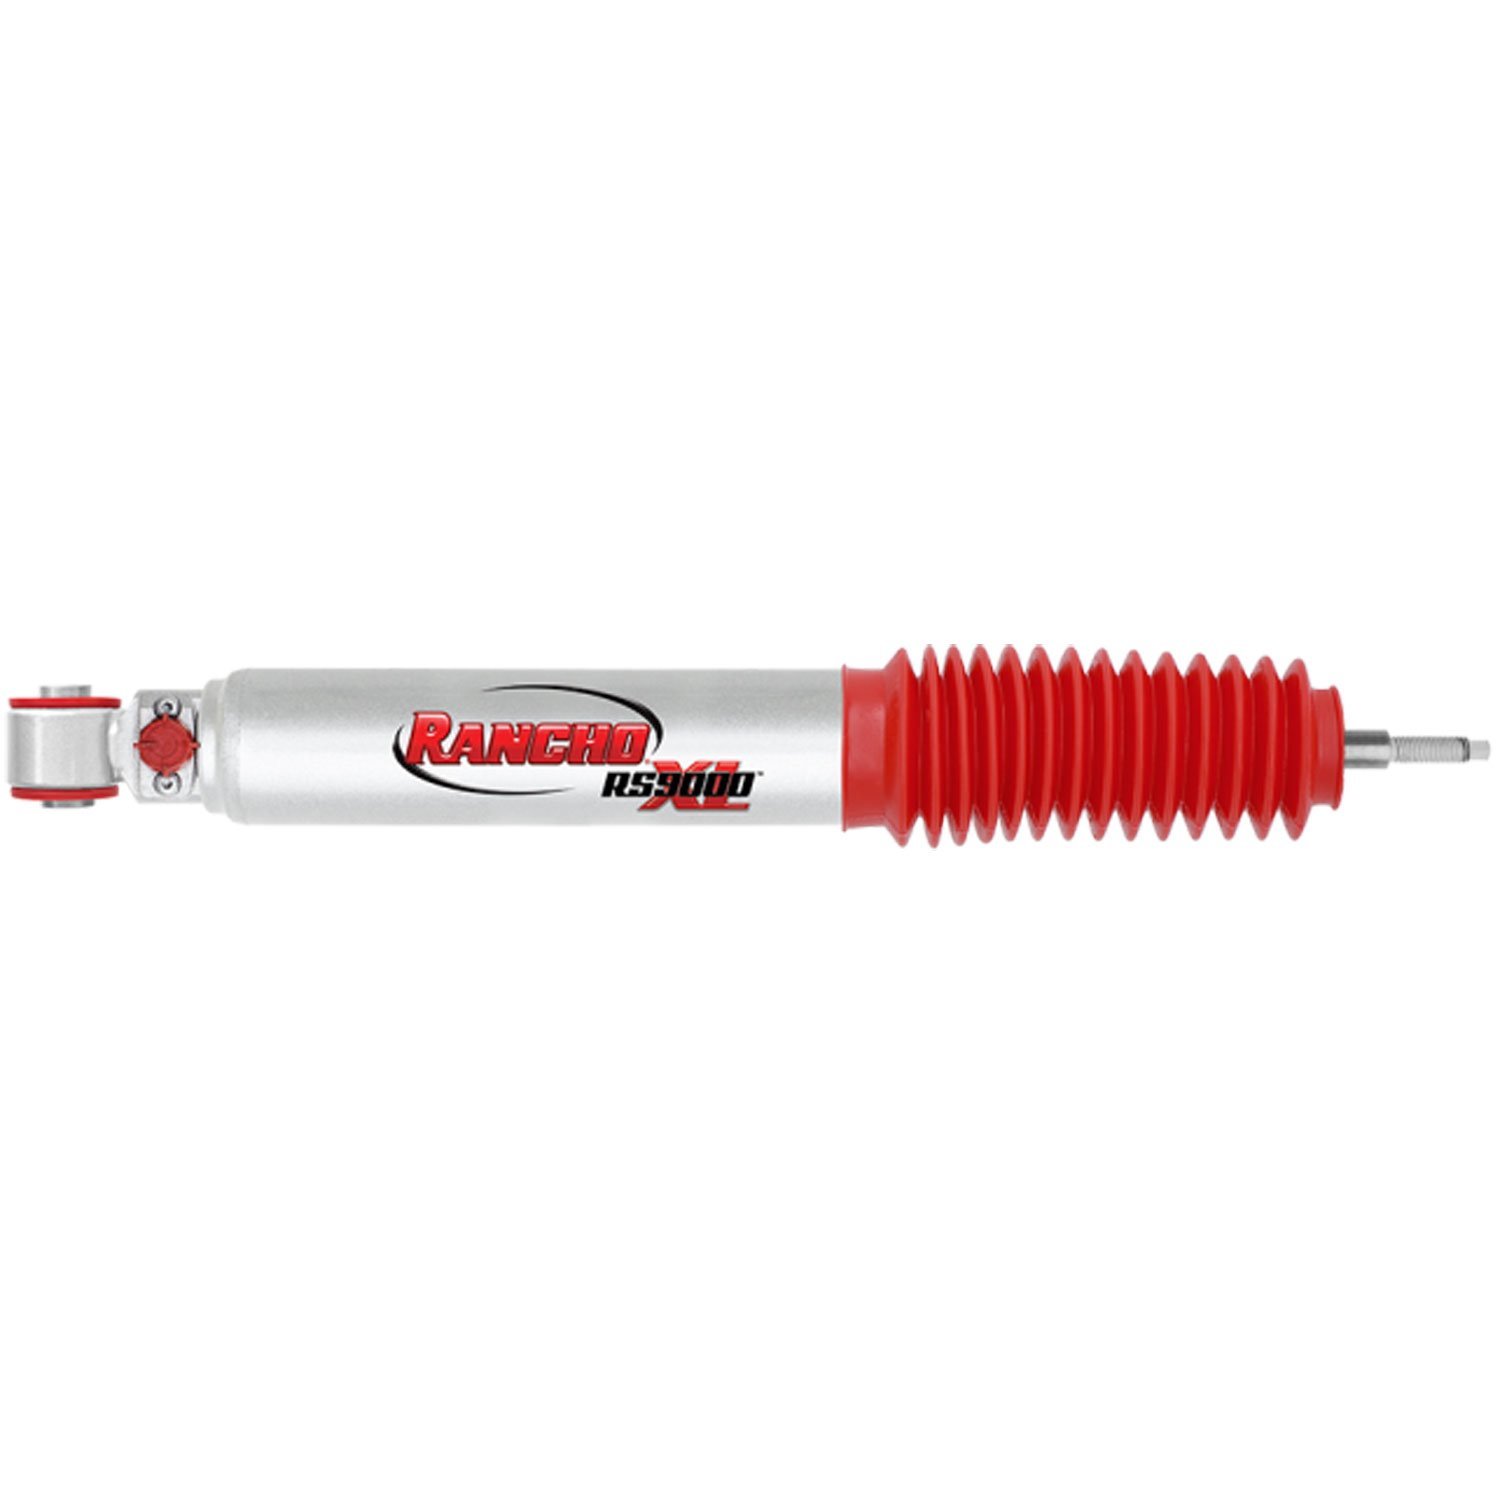 RS9000XL Rear Shock Absorber Fits Dodge Ram 2500 and Ford Super Duty Pickups